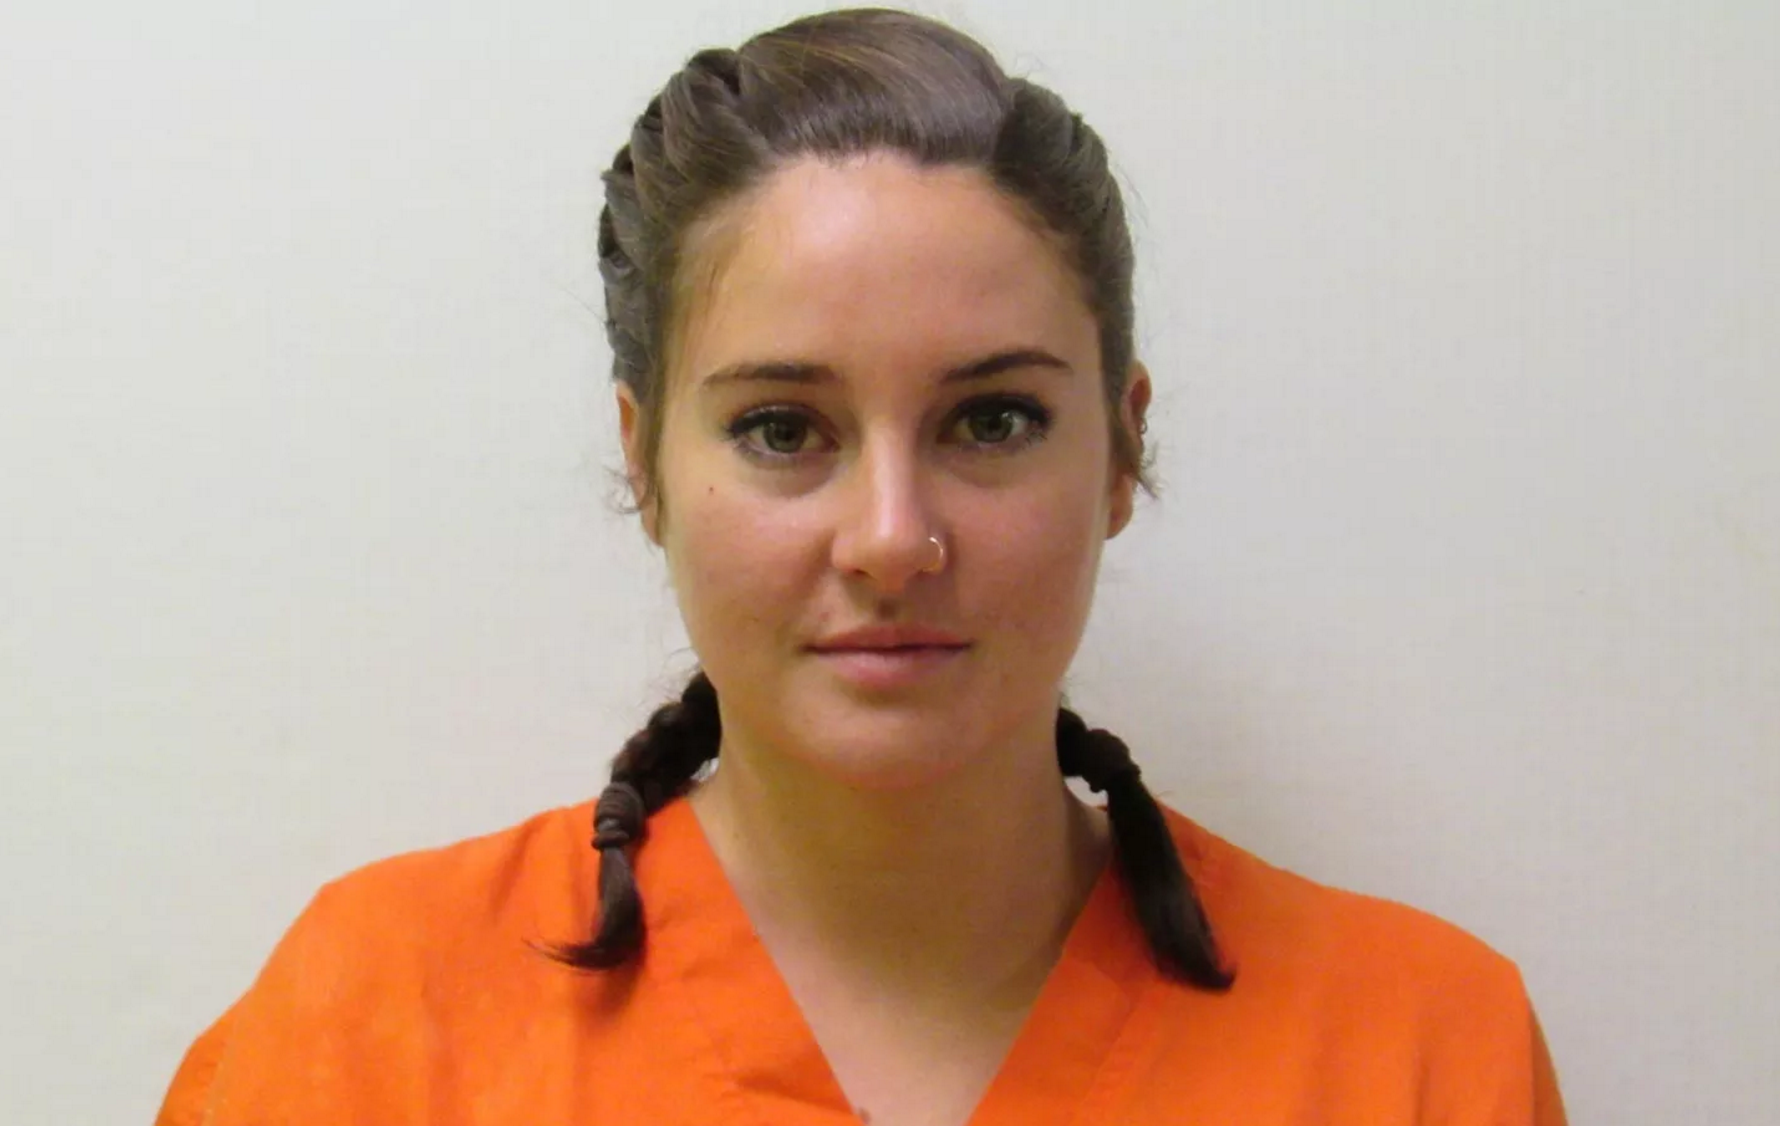 Actress Shailene Woodley (Divergent) Writes in TIME: ‘The Truth About My Arrest’ (Over DAPL)